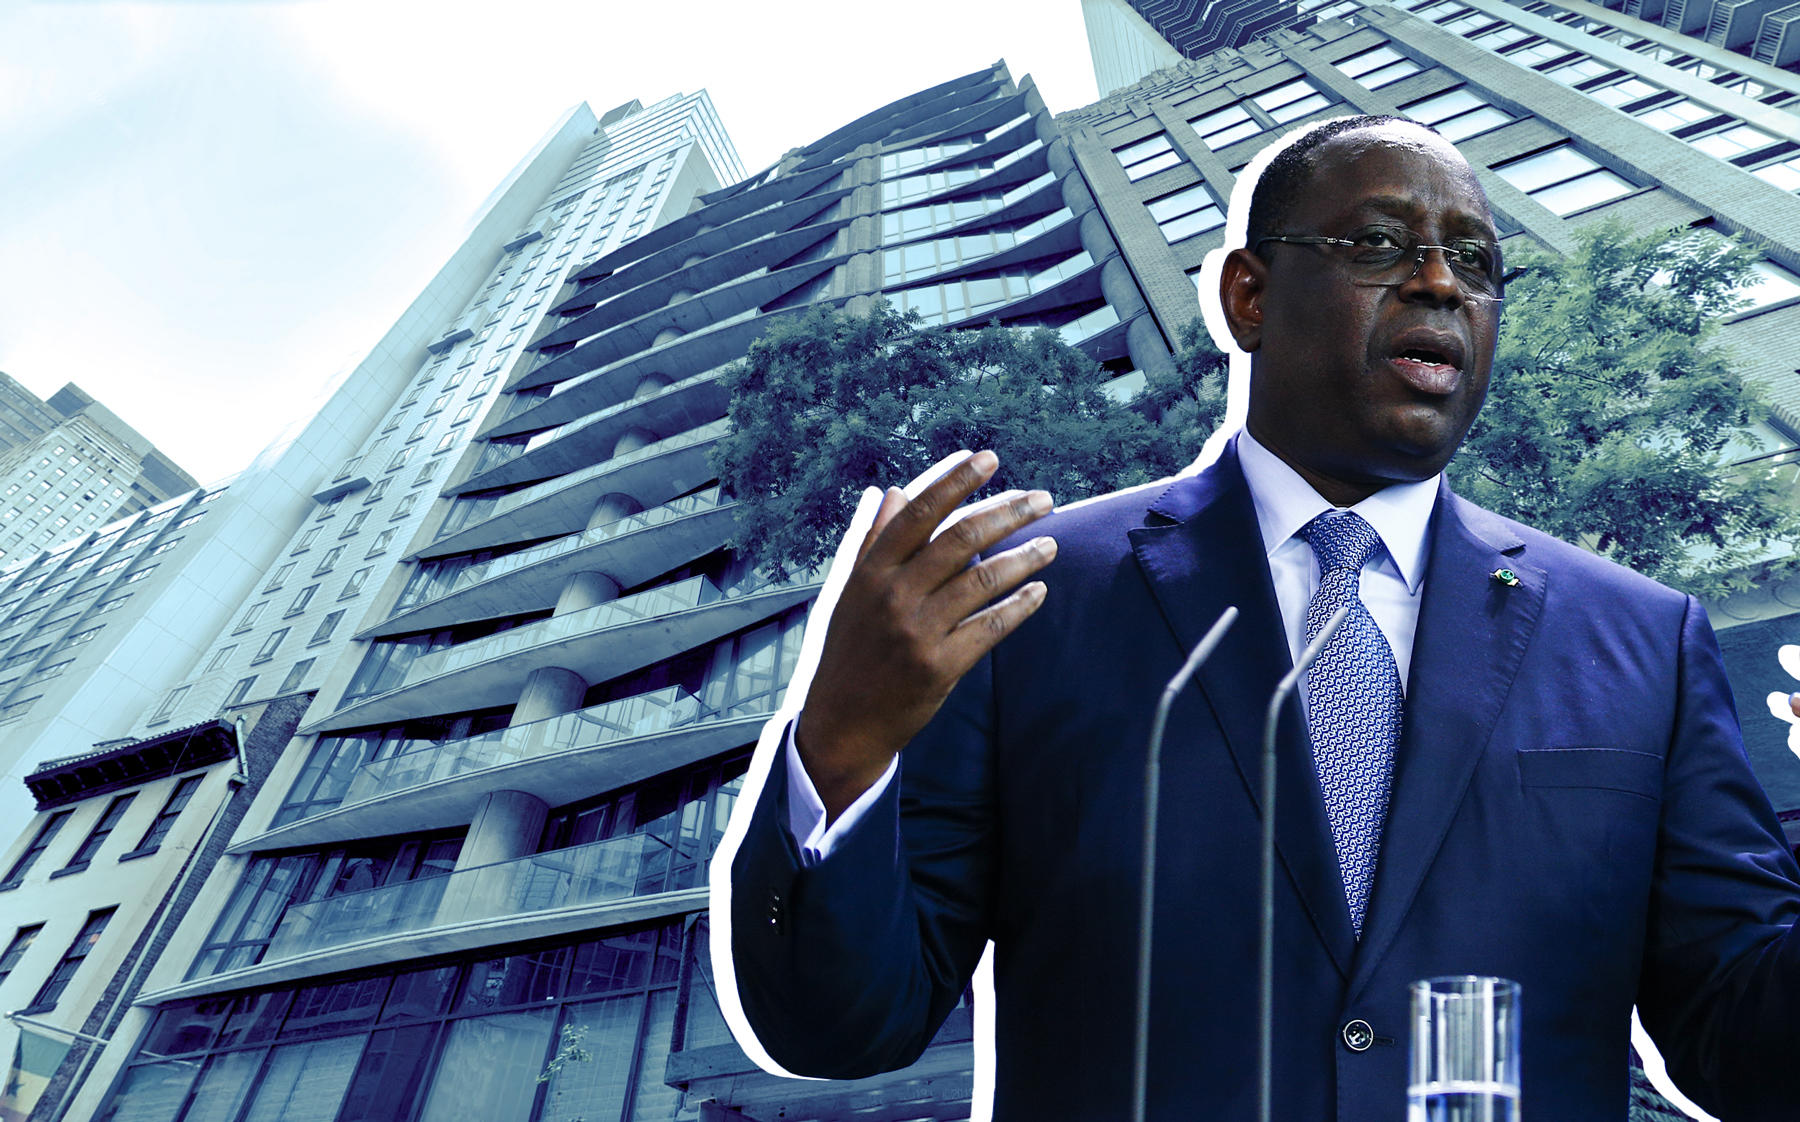 227-235 East 44th Street and Senegalese President Macky Sall (Credit: Google Maps; Sall by Abdulhamid Hosbas/Anadolu Agency via Getty Images)